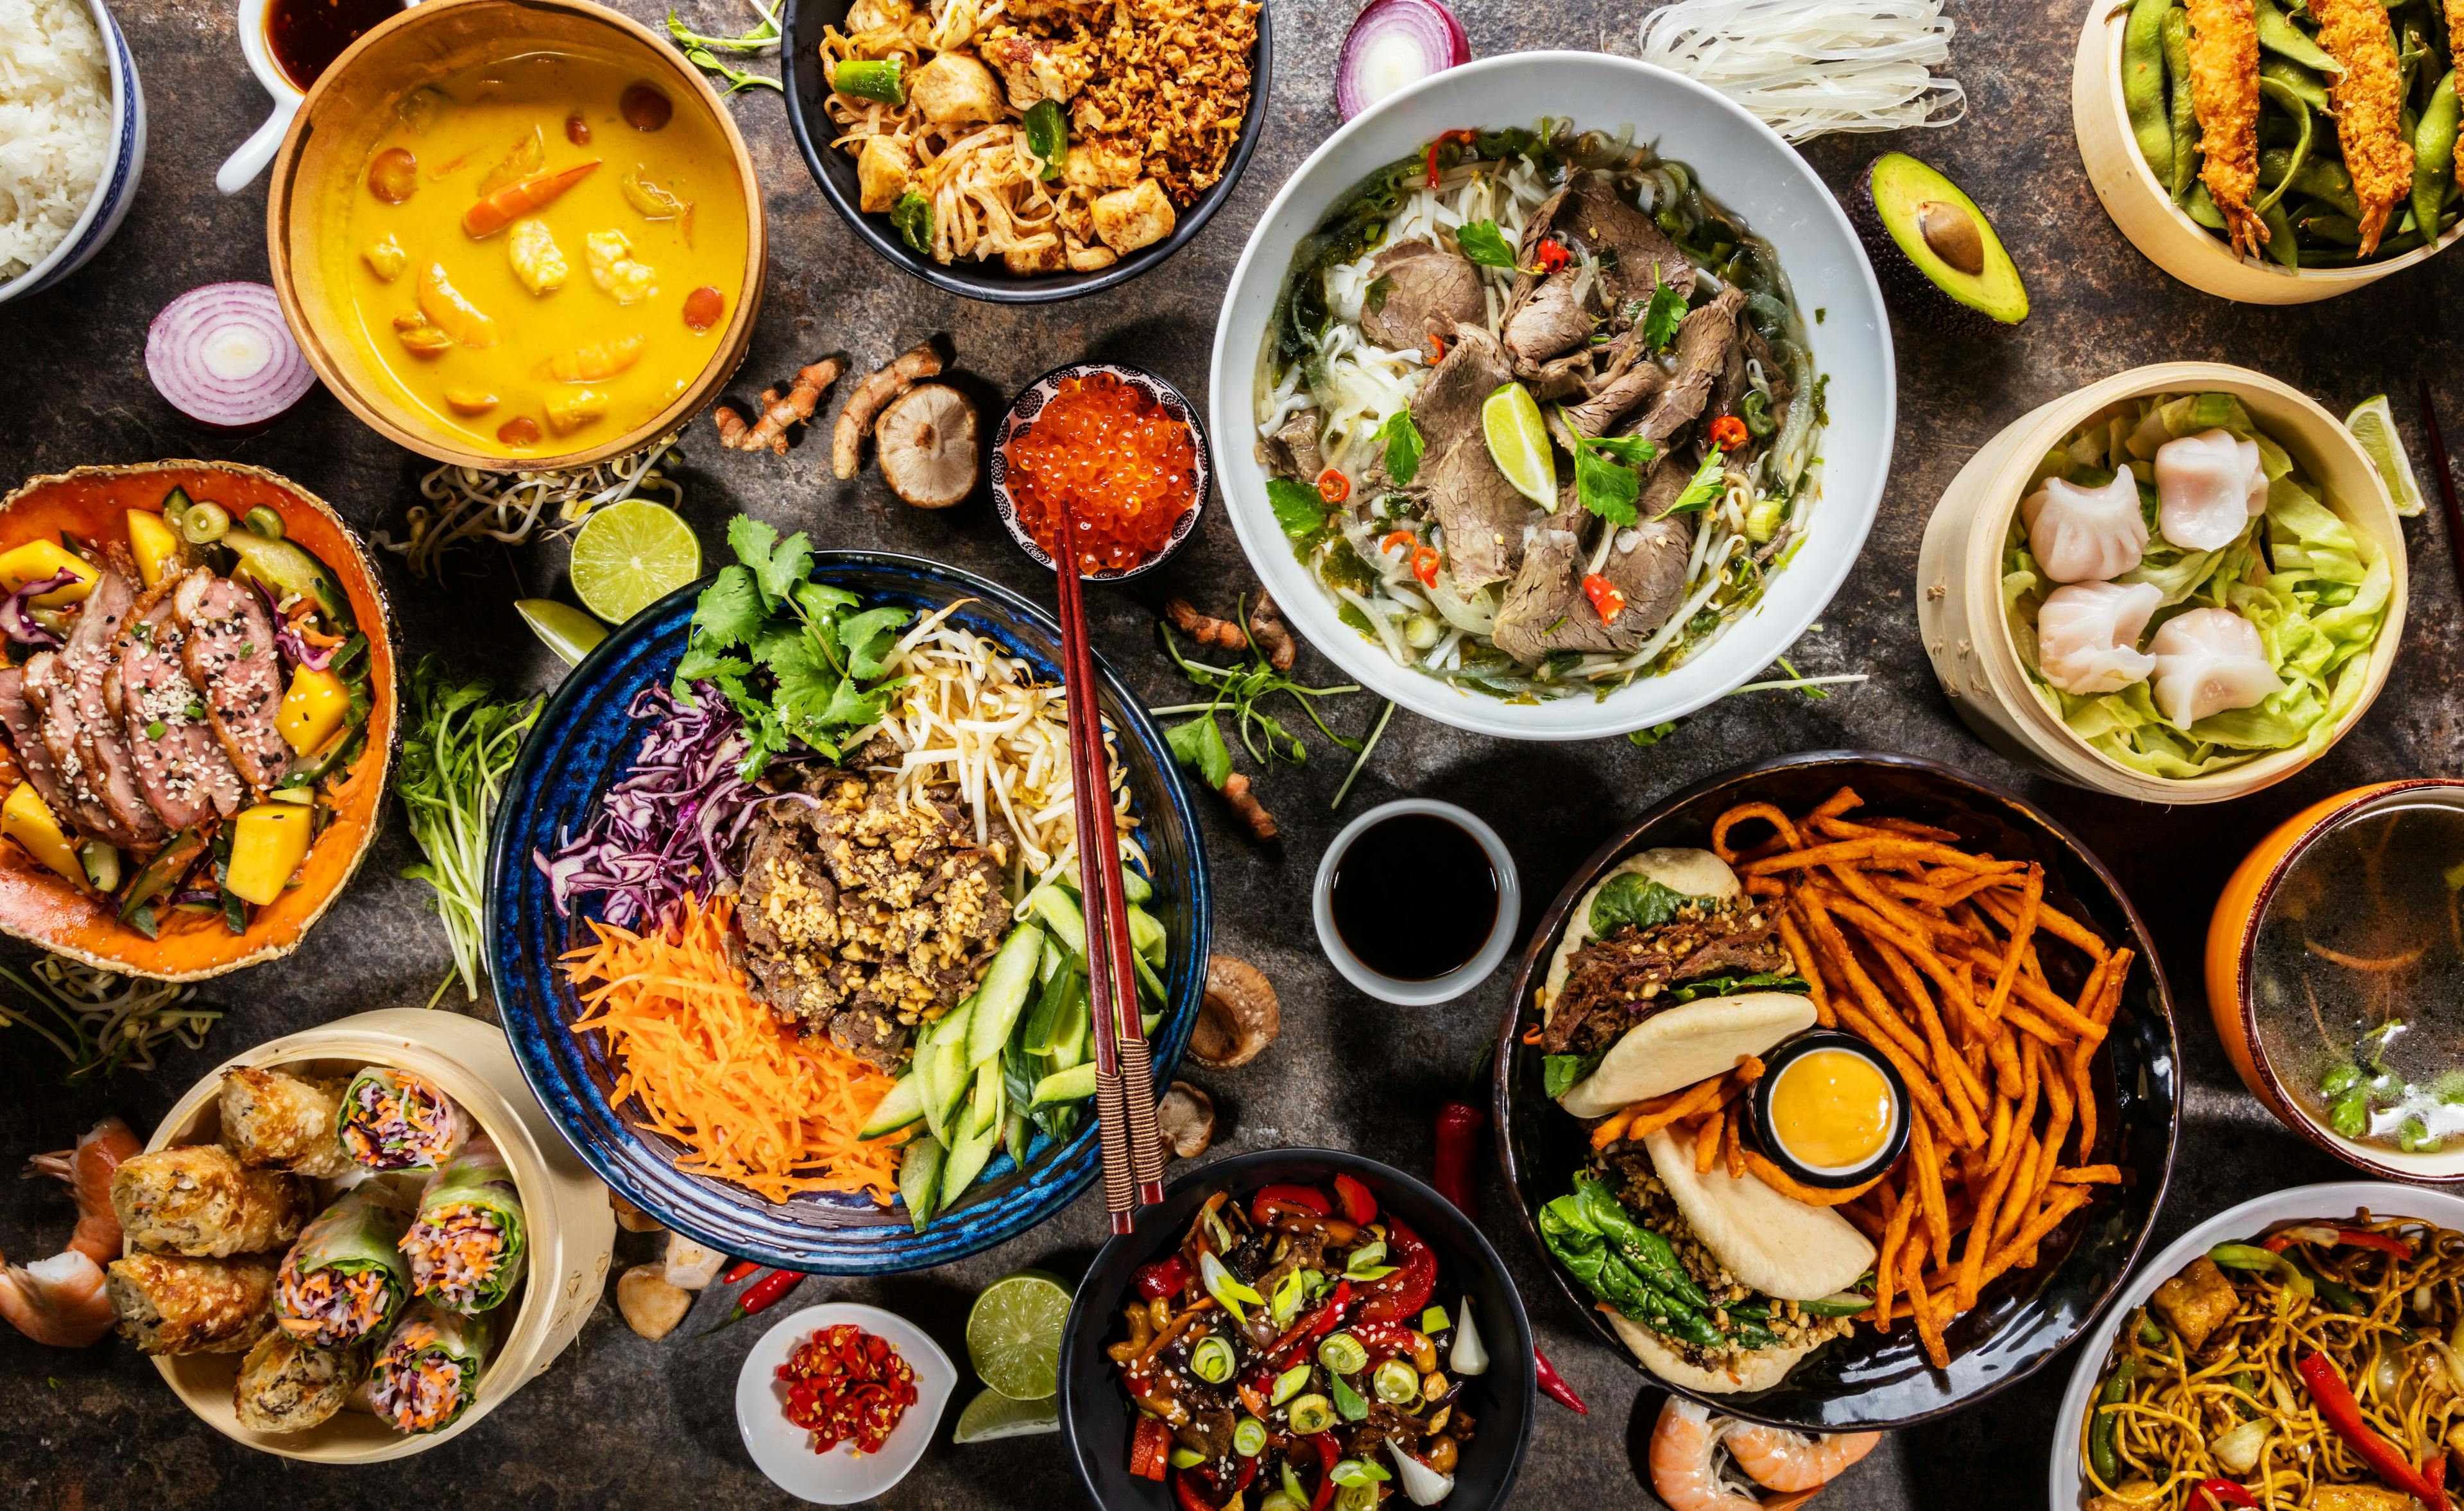 Top view composition of various Asian food in bowl | Image Credit: © Jag_cz - stock.adobe.com